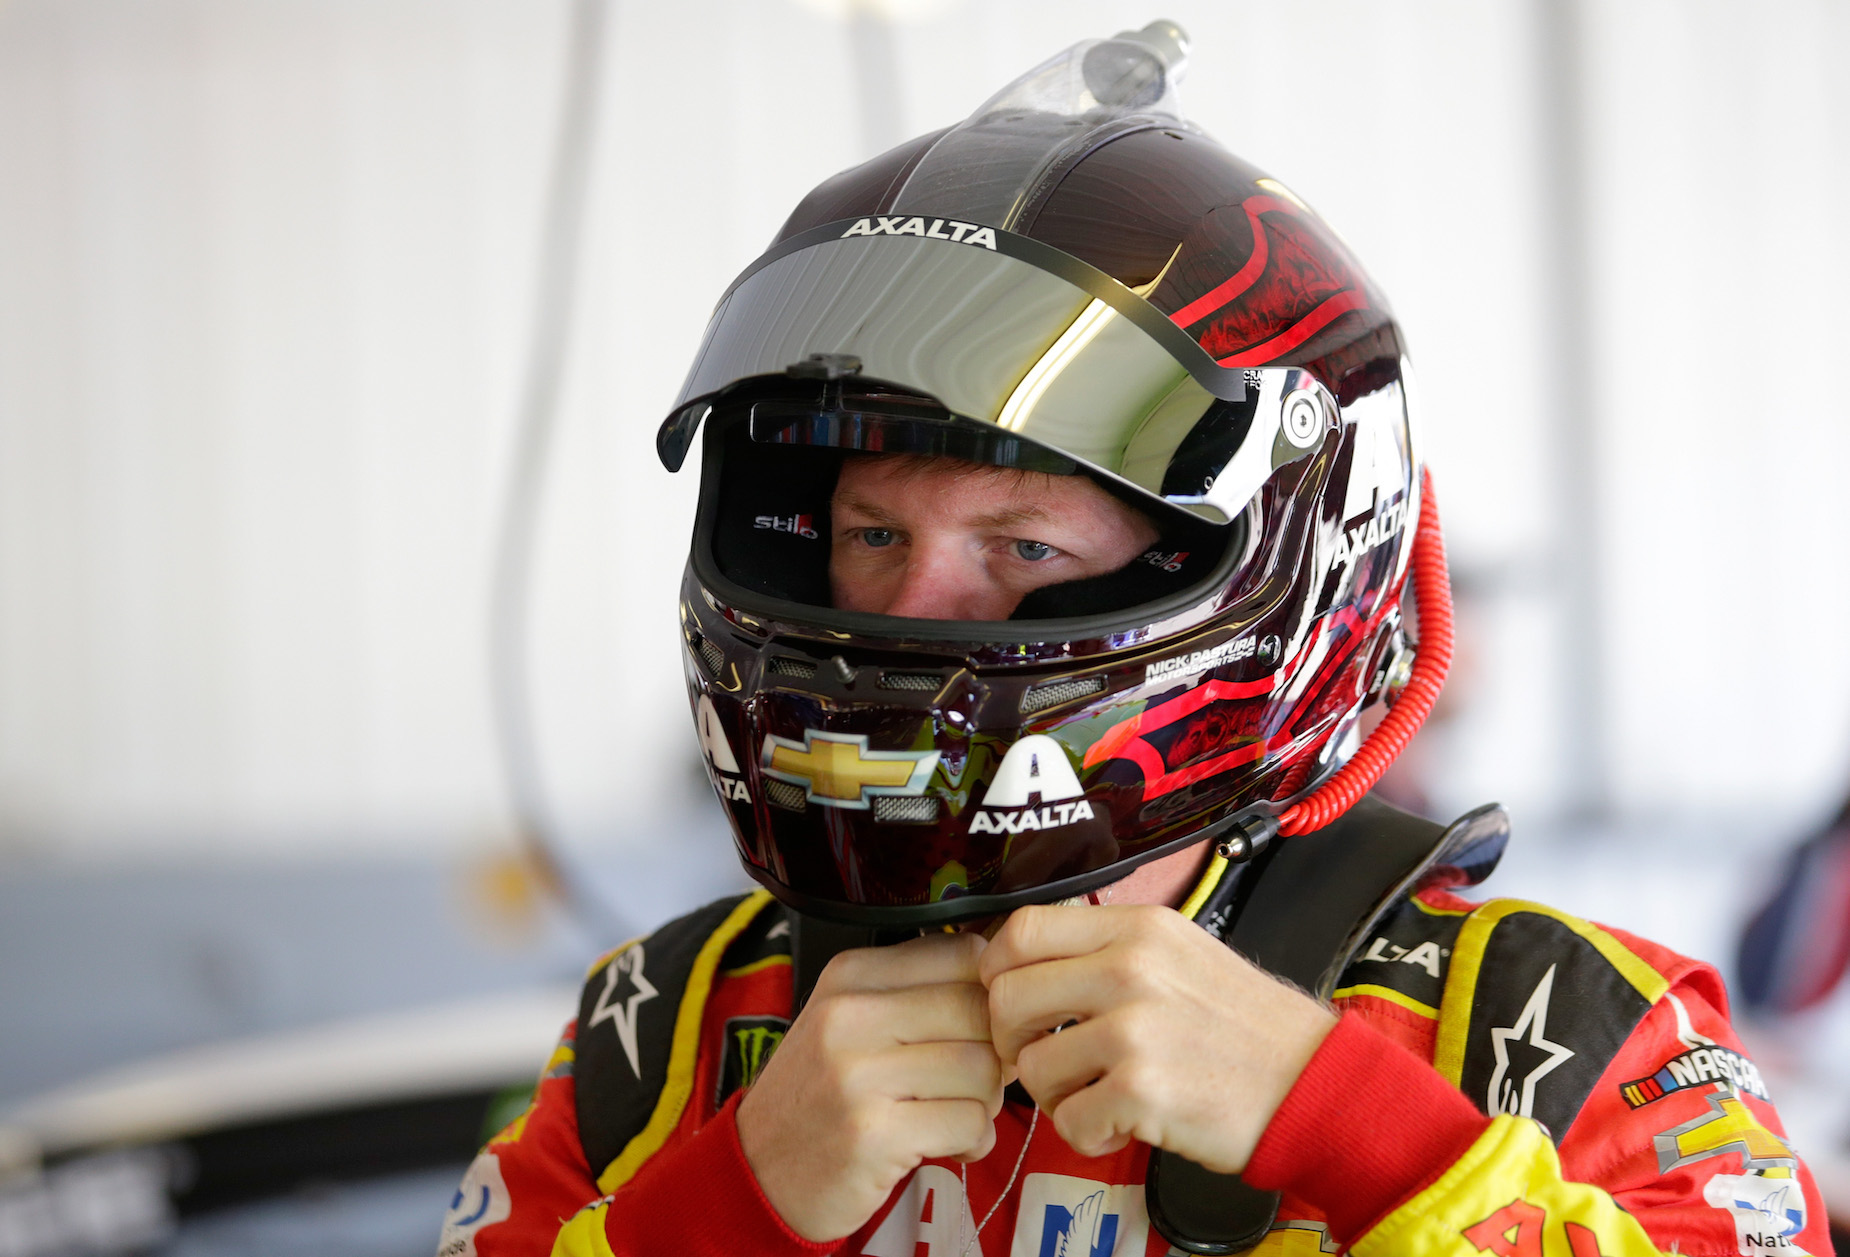 Dale Earnhardt Jr. Suffered Through His Concussions in Silence But Used That Awful Experience For a Good Cause